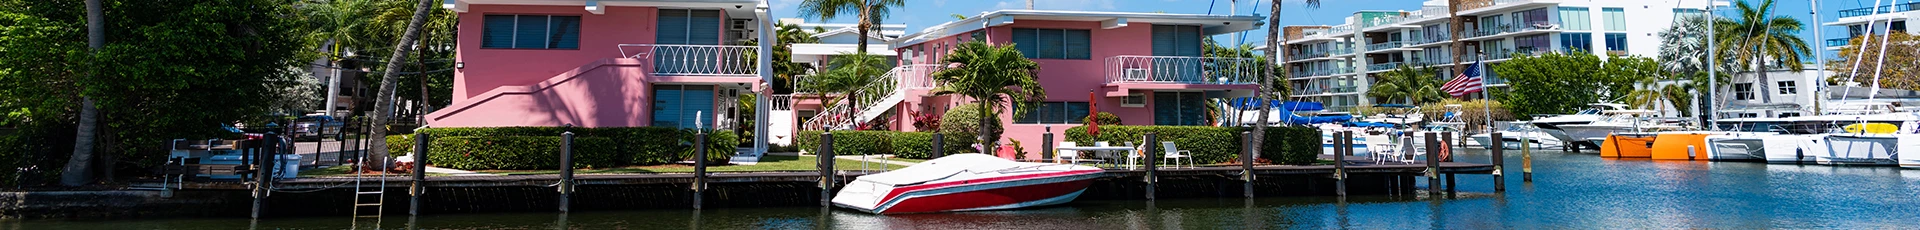 Boat Removal, Dismantle and Disposal in Wimauma Florida